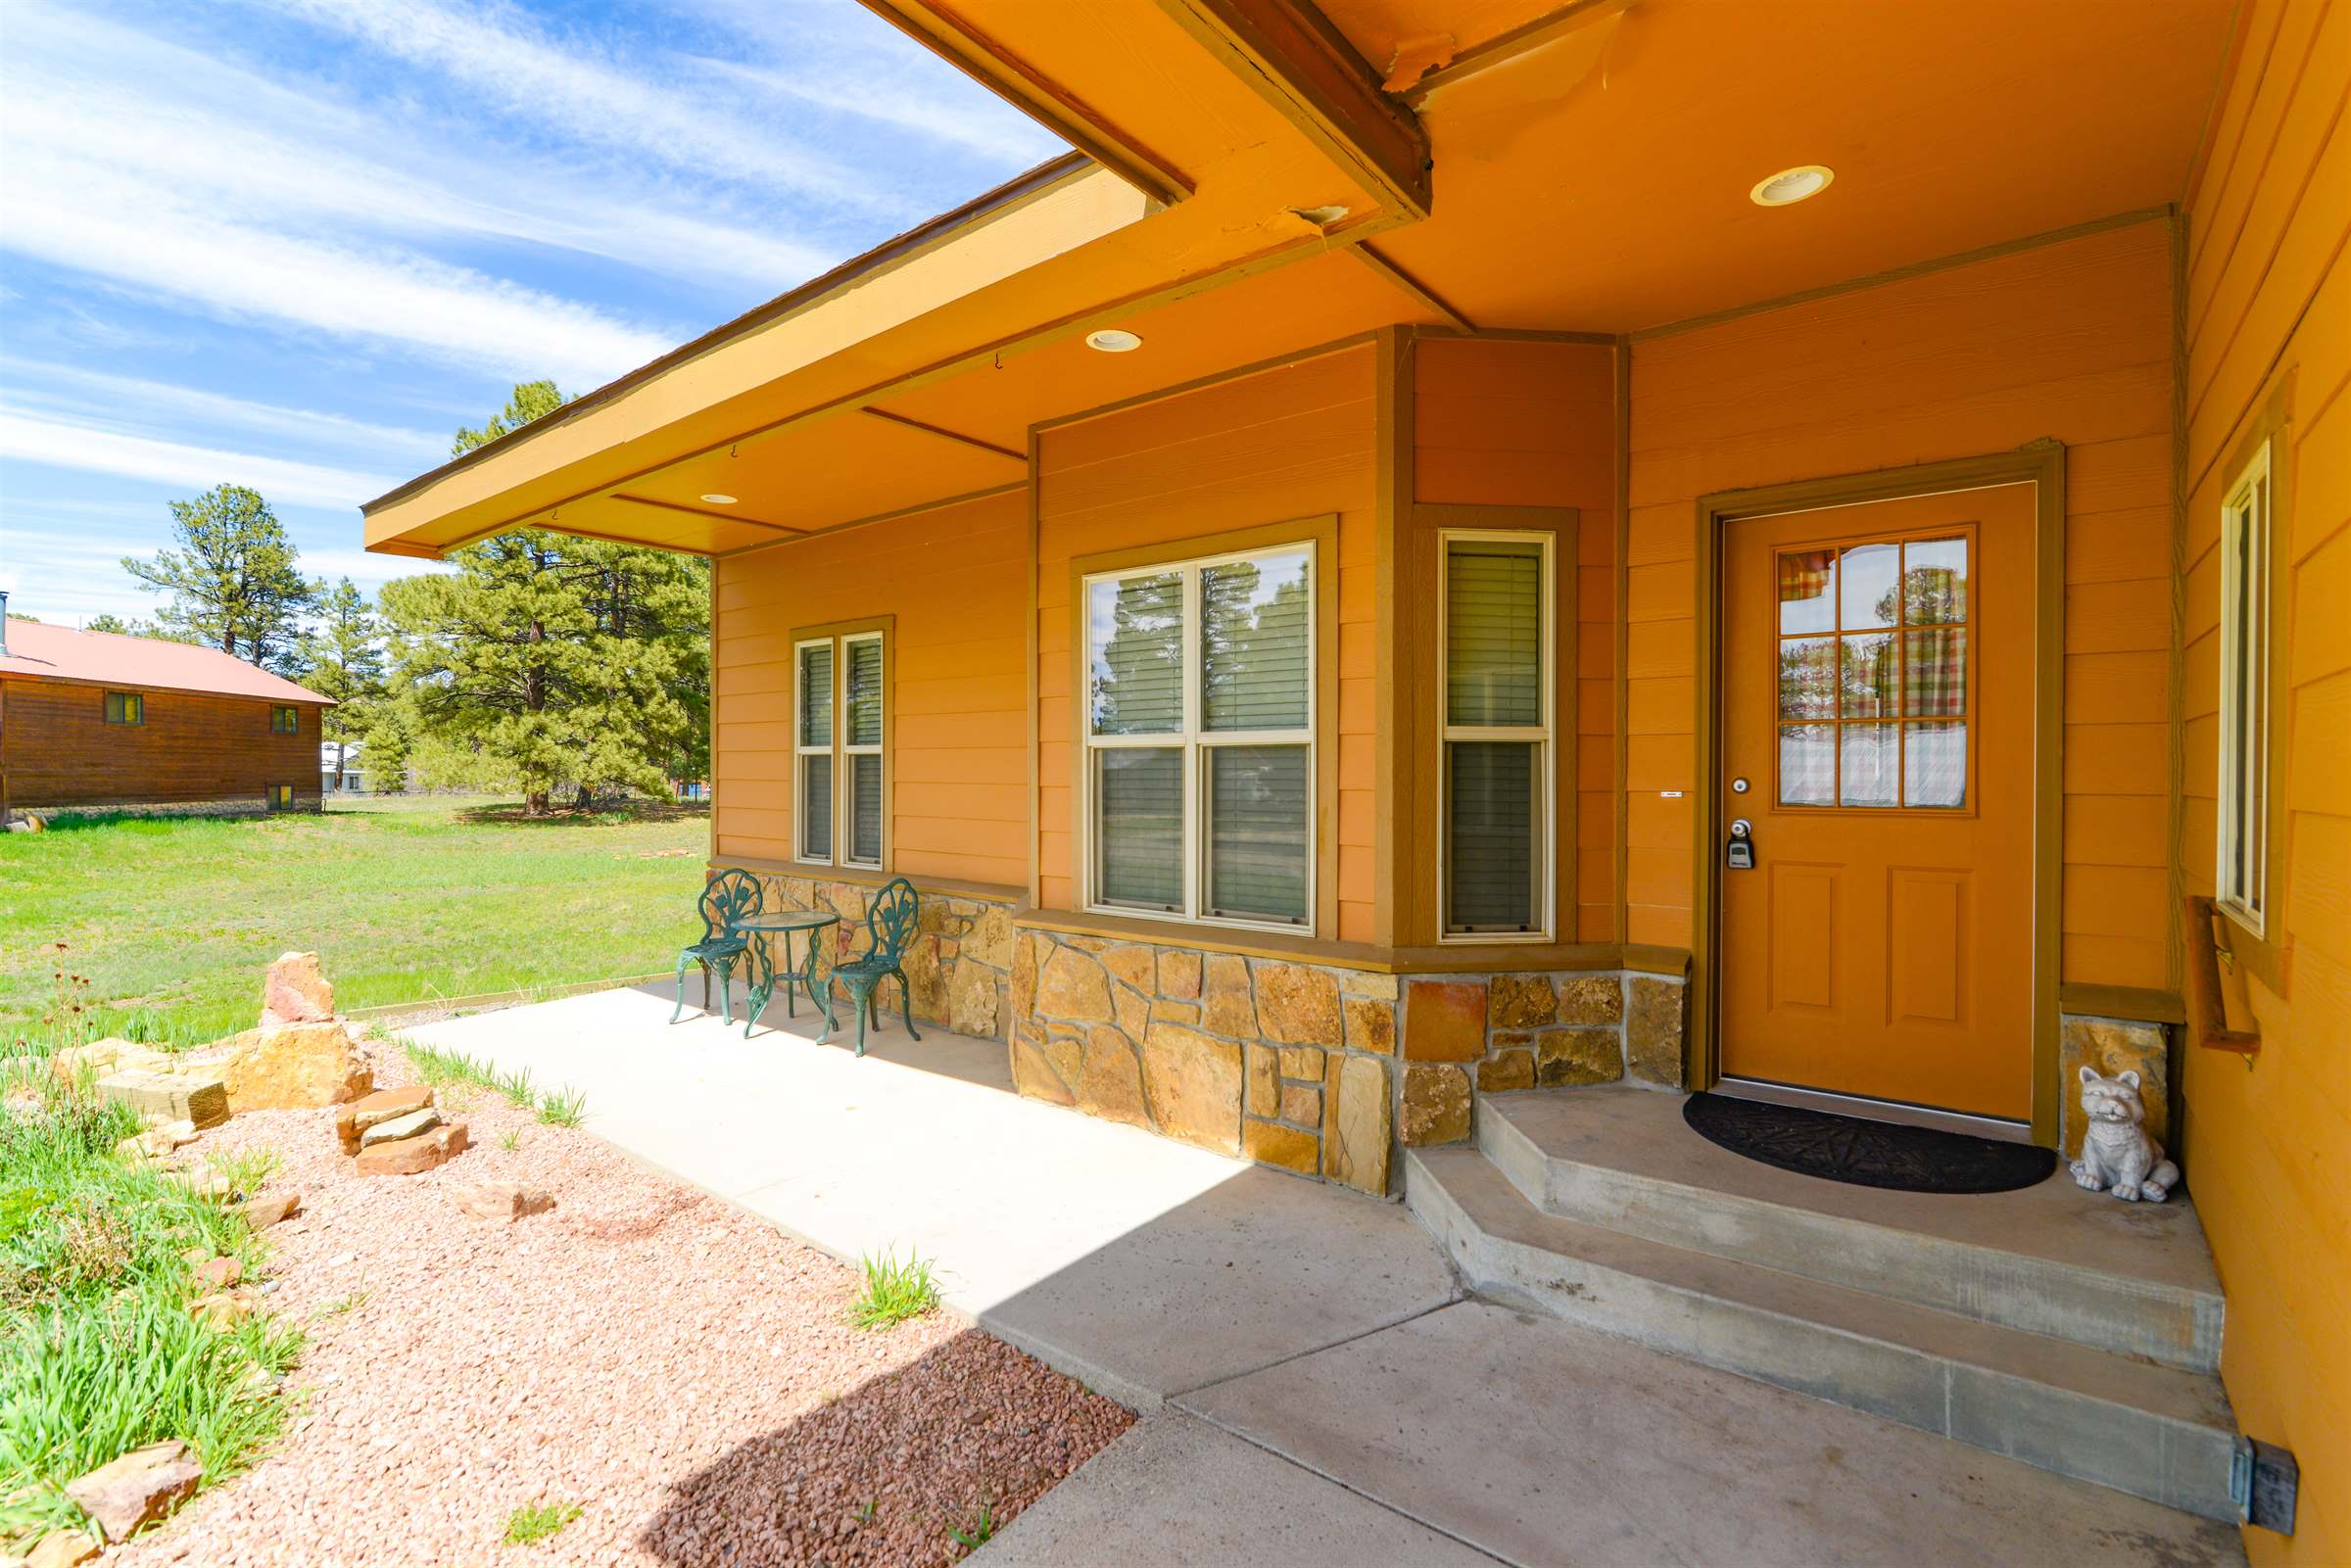 Chipper's Abode, #35 Chipper Ct - Short Term, Pagosa Springs, CO 81147